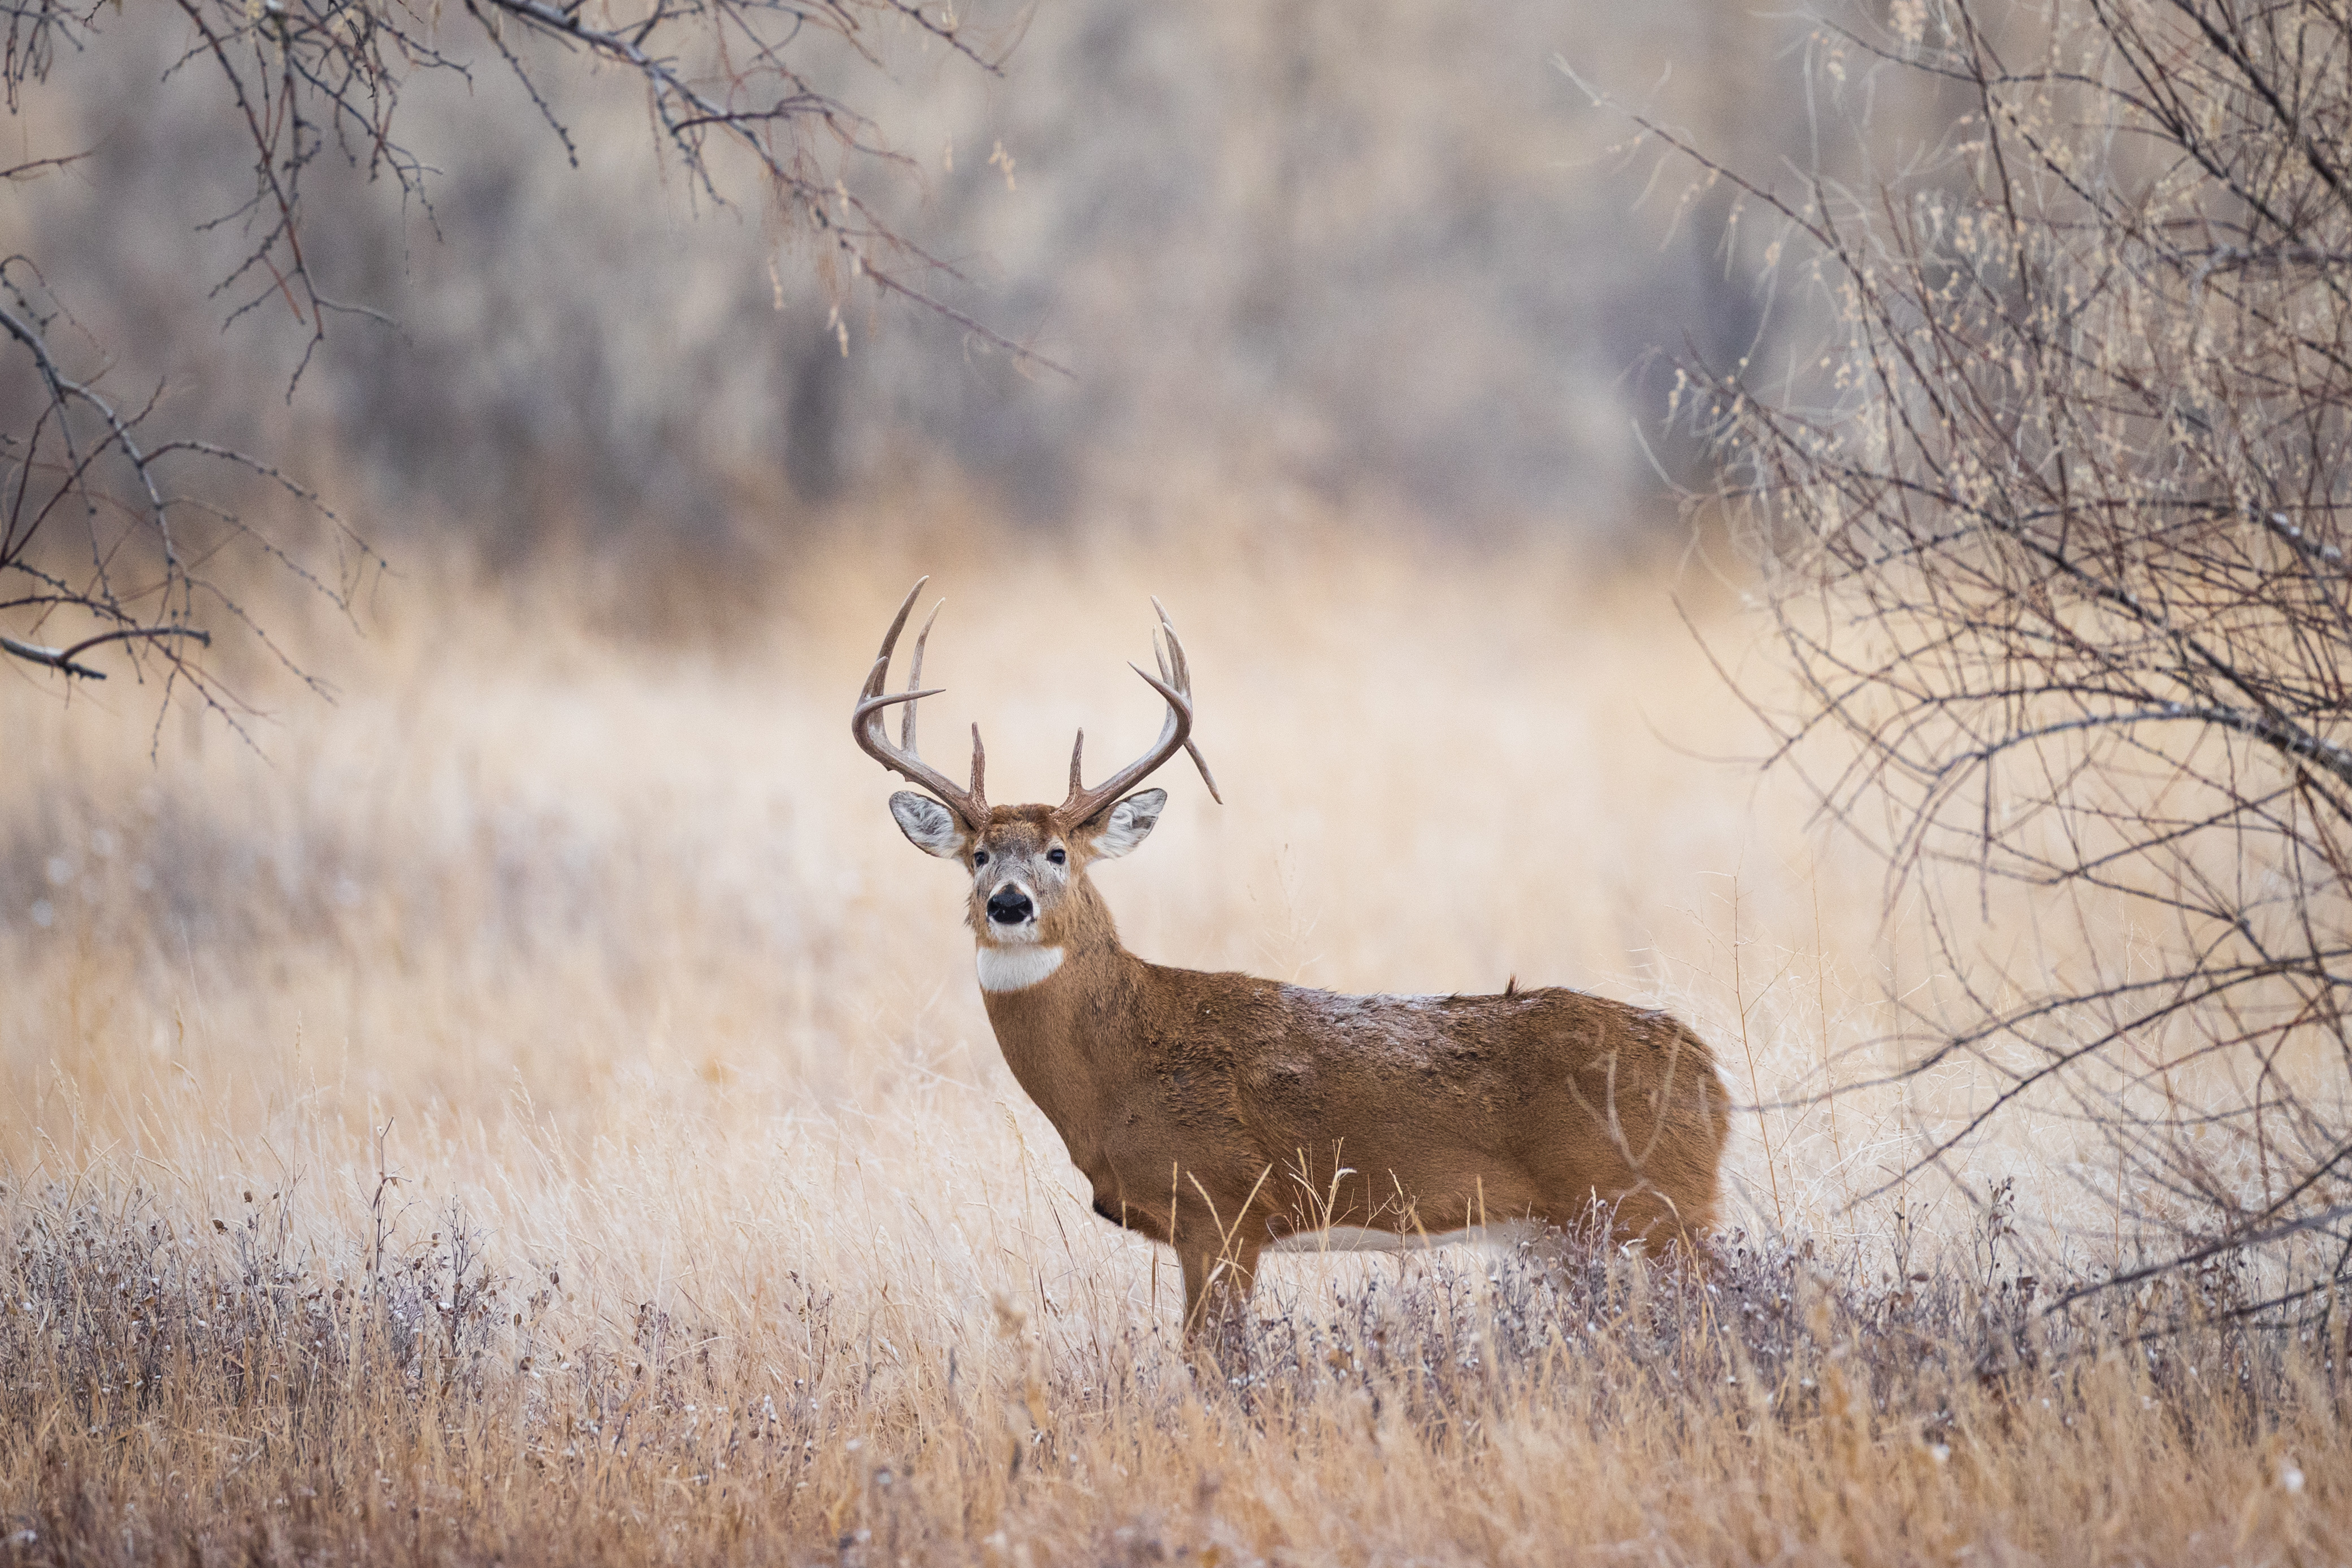 A whitetail dear in the field, ethical hunting concept. 